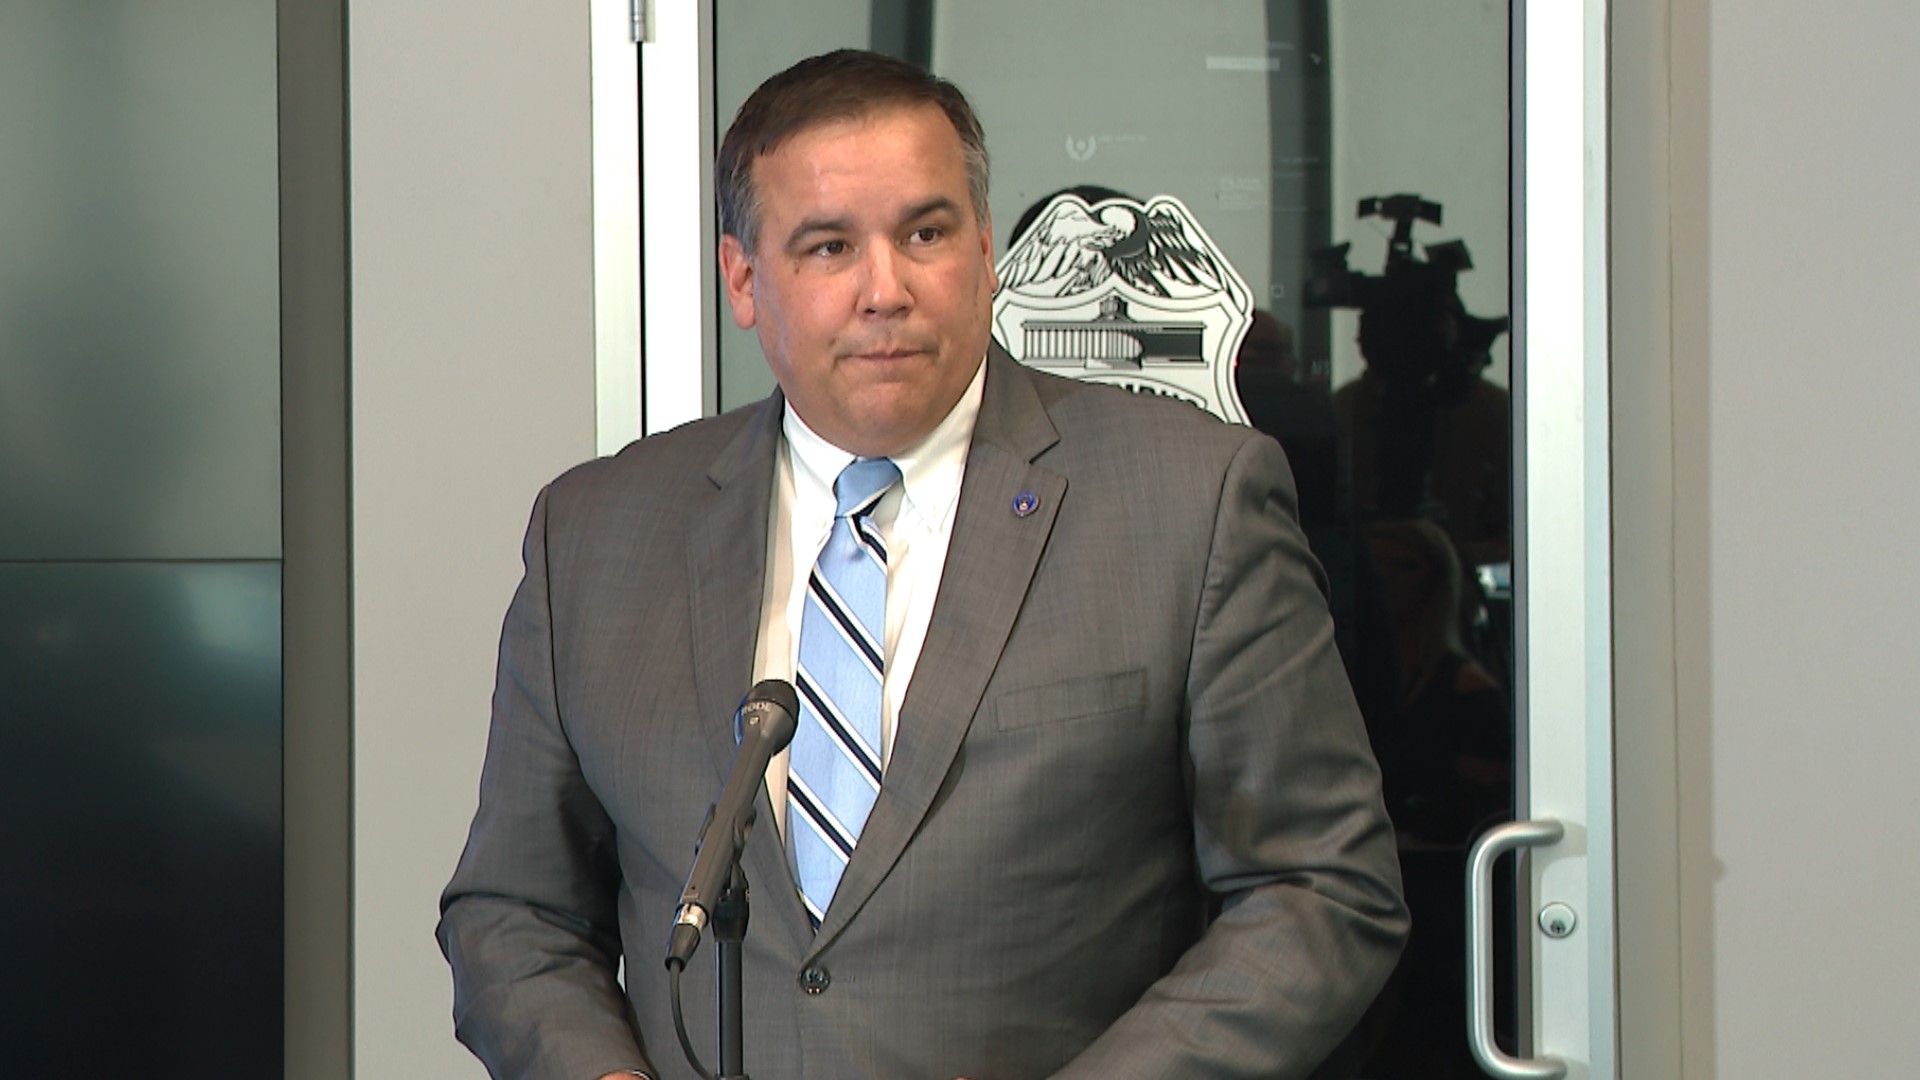 Ginther is calling on state and federal politicians to "get out of the way" and let the city enact gun control measures to address violent crime.